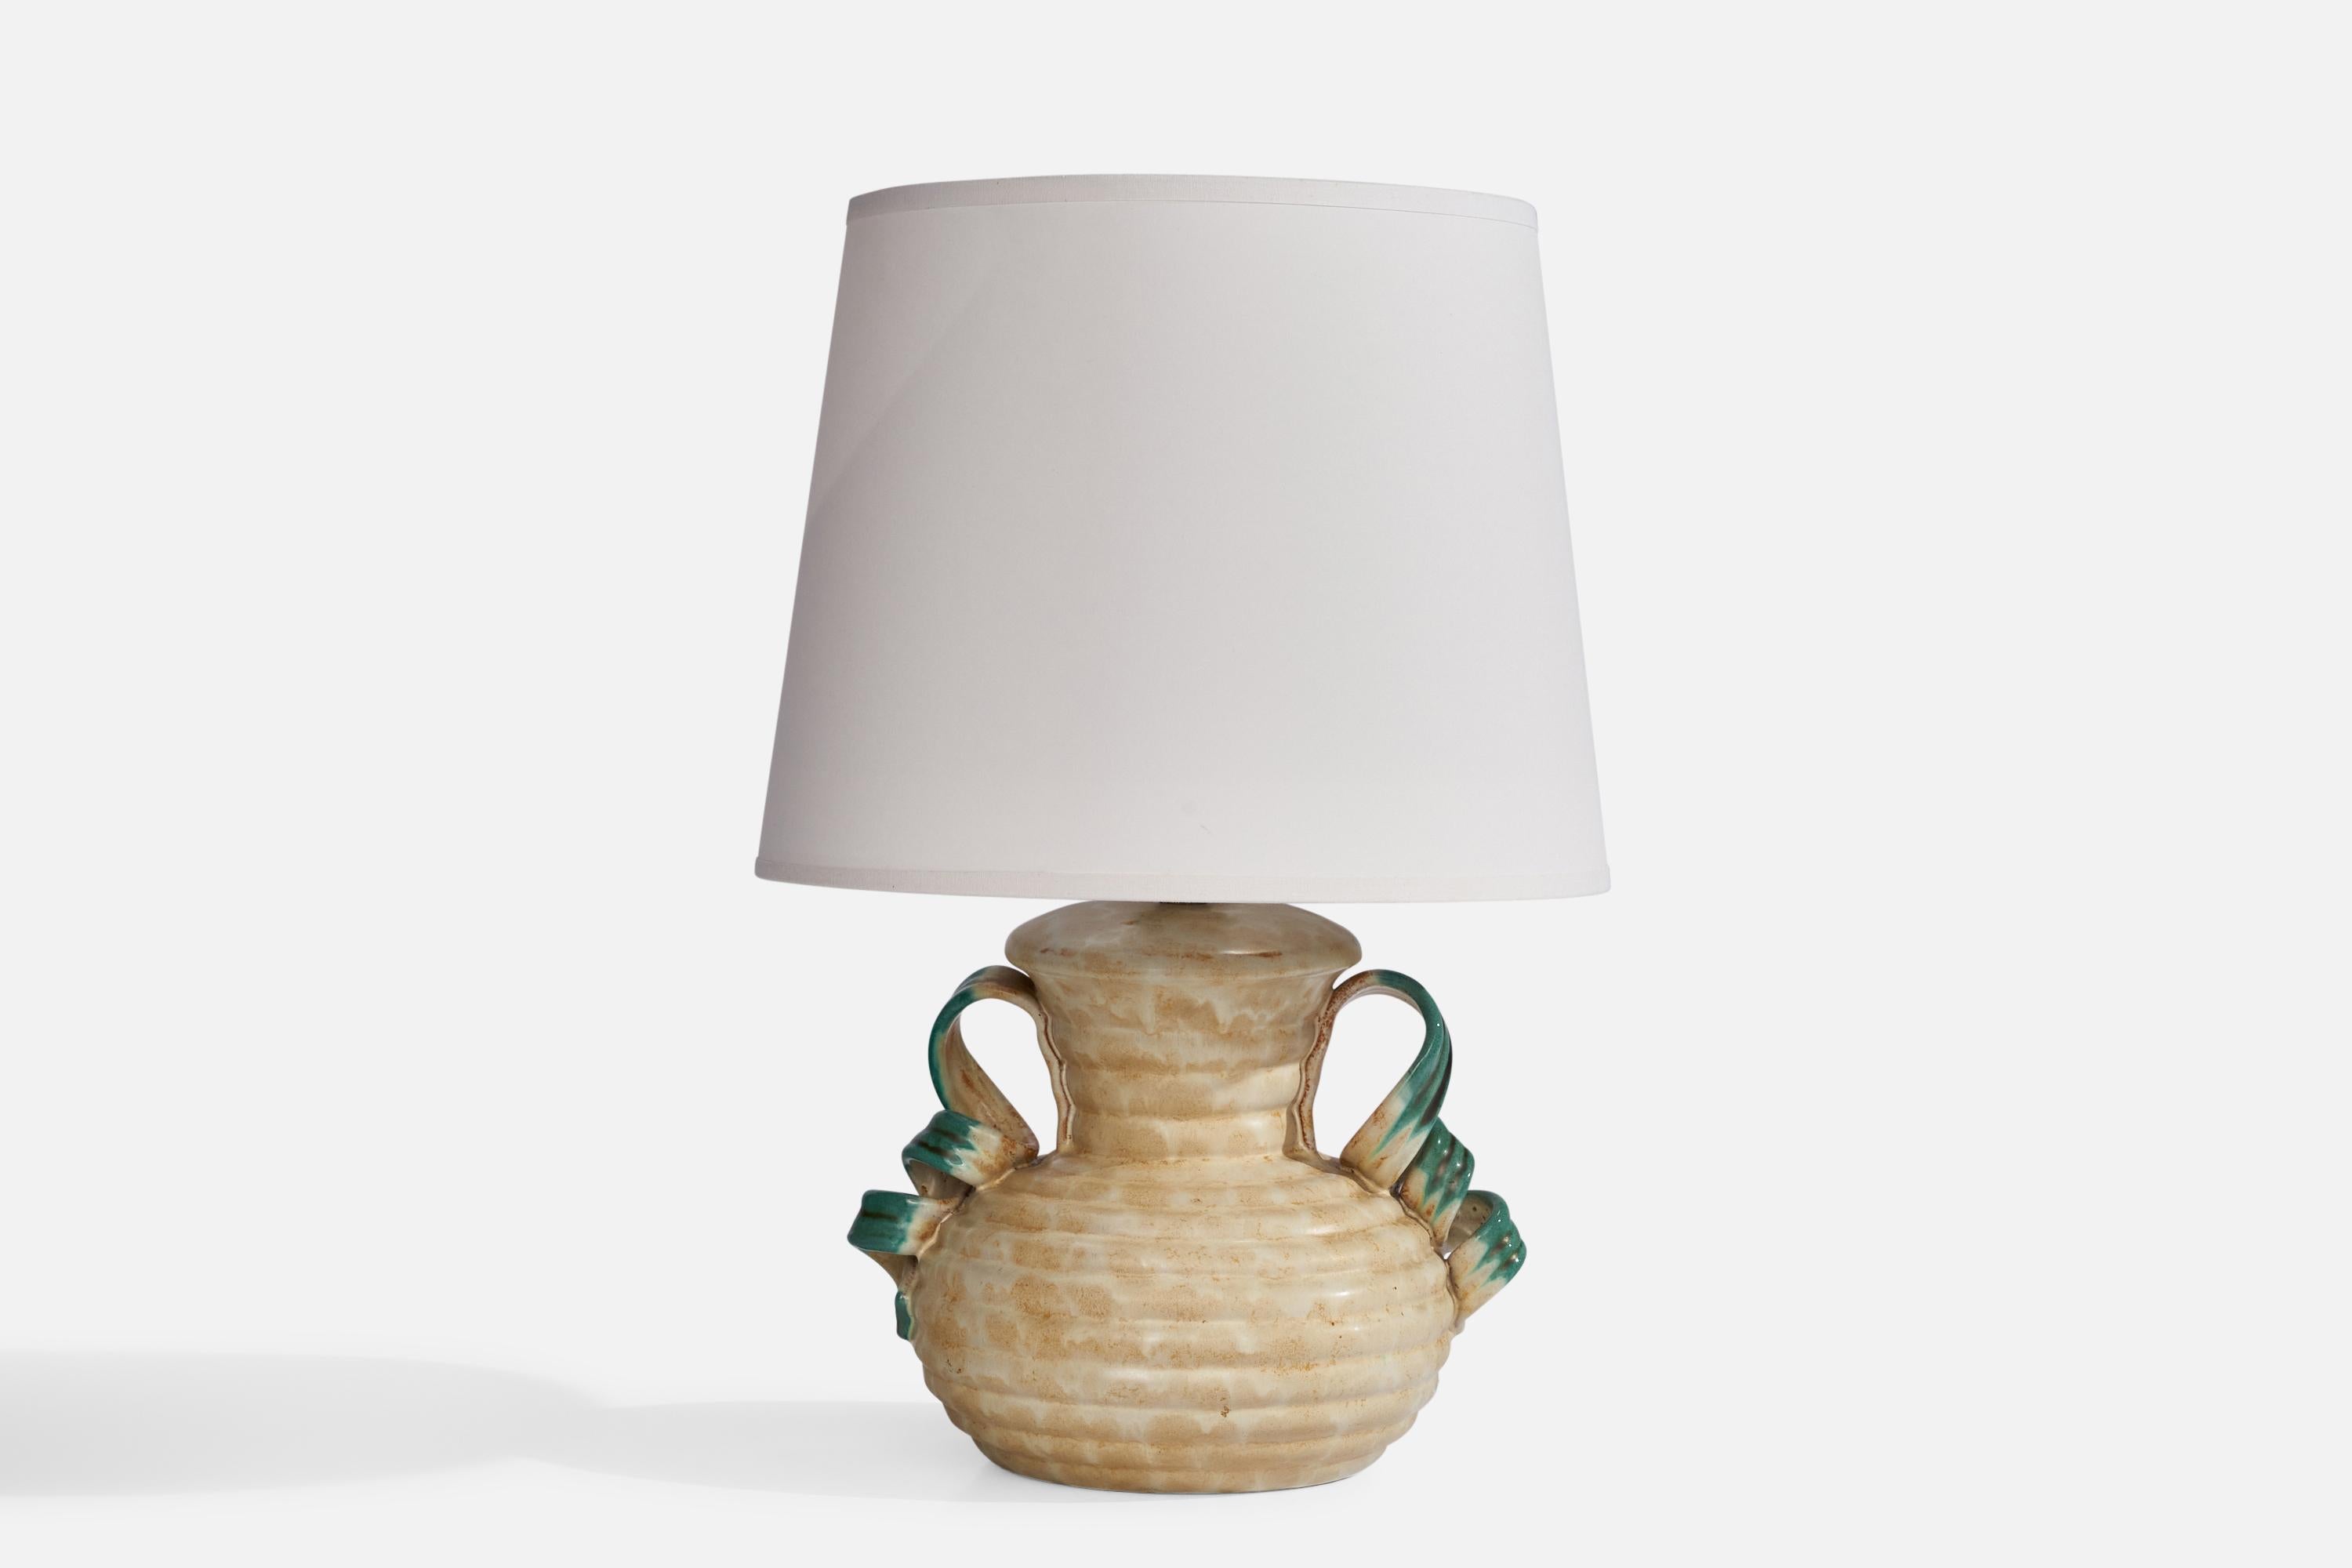 A green and beige-glazed earthenware table lamp designed by Anna-Lisa Thomson and produced by Upsala Ekeby, Sweden, 1930s.

Dimensions of Lamp (inches): 9” H x 8” W x 6” Depth
Dimensions of Shade (inches): 8” Top Diameter x 10” Bottom Diameter x 8”